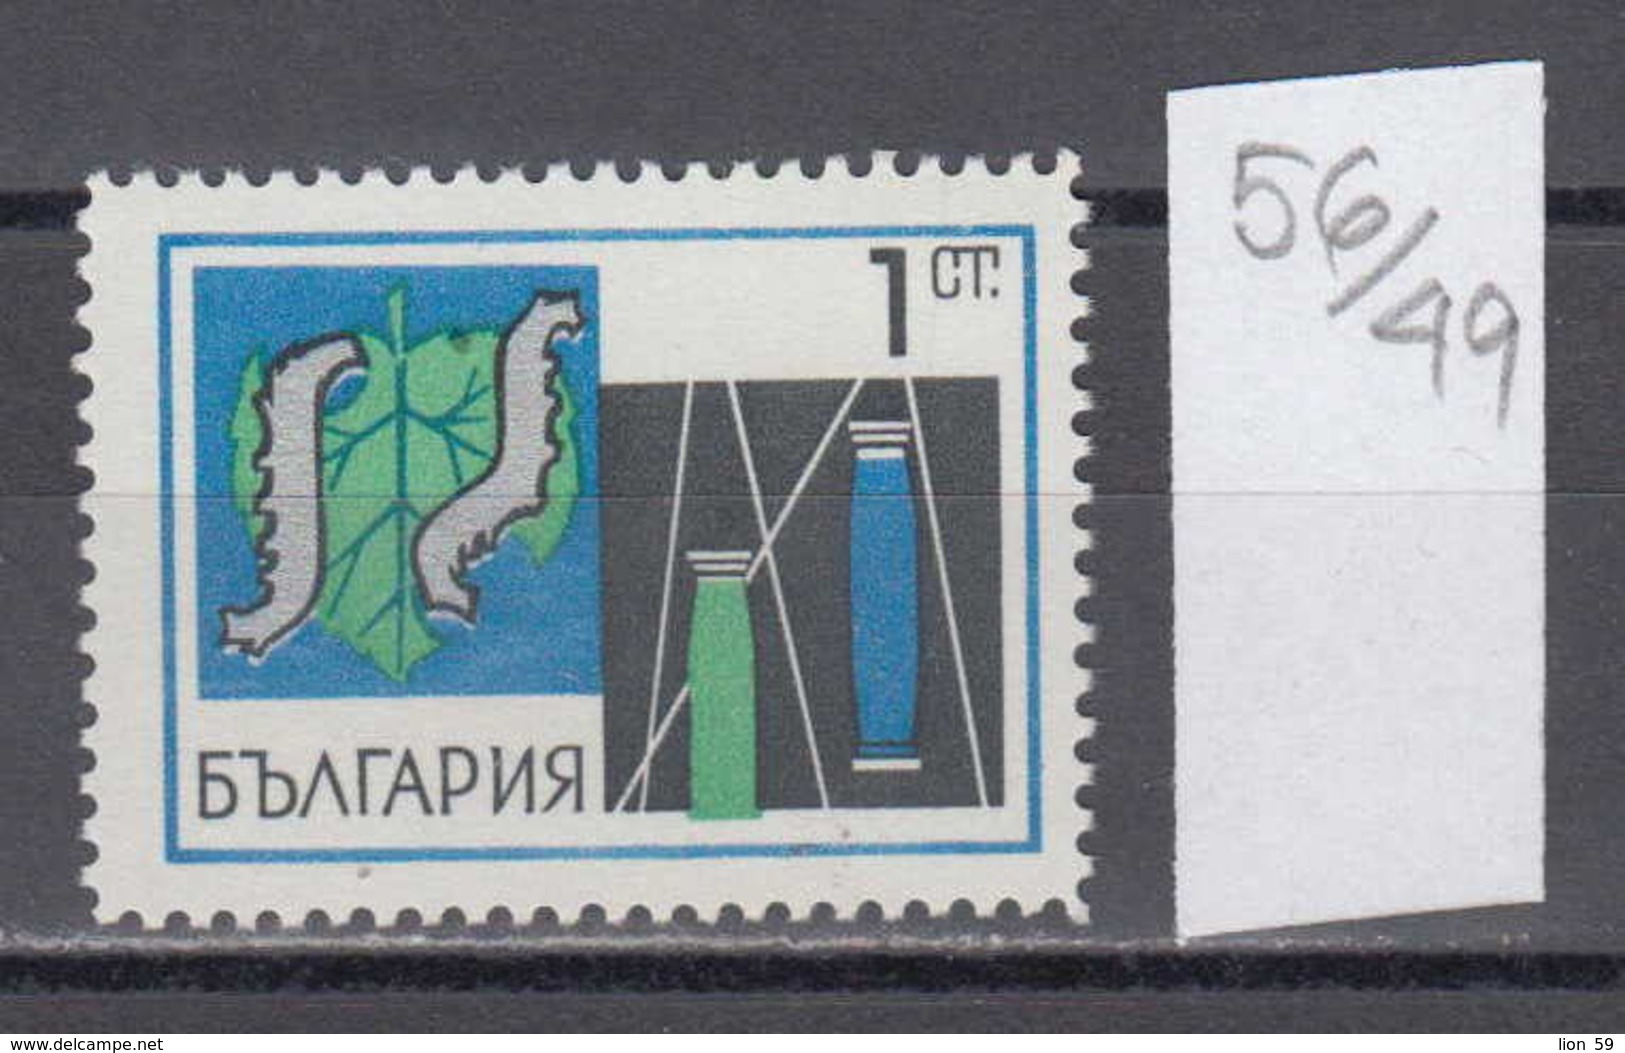 49K56 / 1930 Bulgaria 1969 Michel Nr. 1865 - Raupen , Caterpillar Insect , Silk Industry , Textile Industry - Usines & Industries